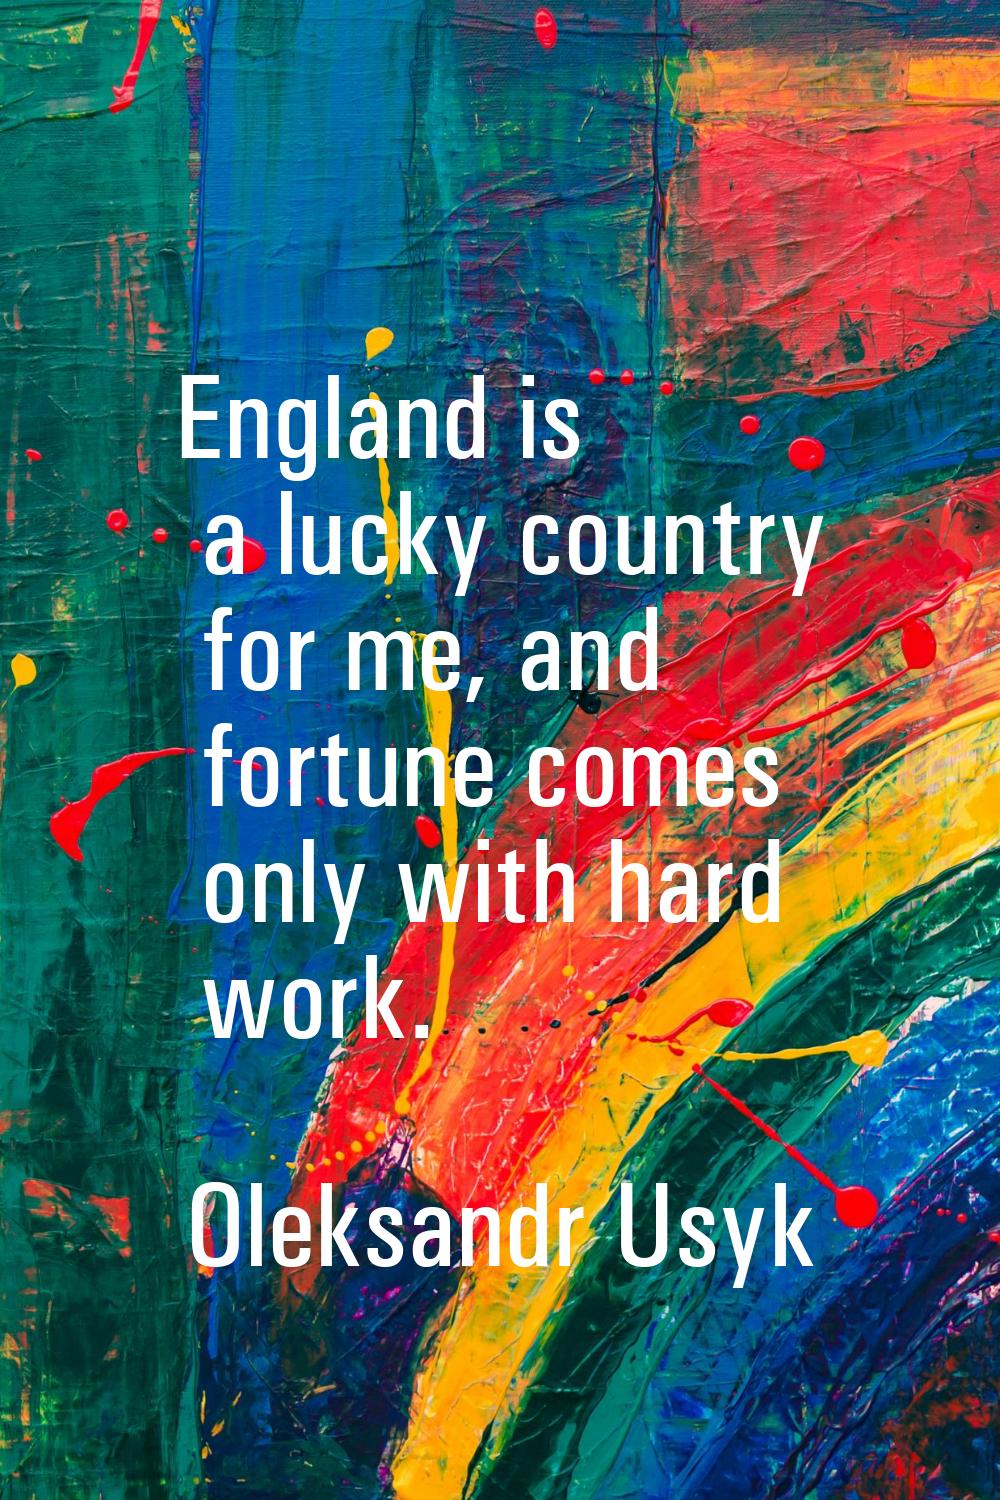 England is a lucky country for me, and fortune comes only with hard work.